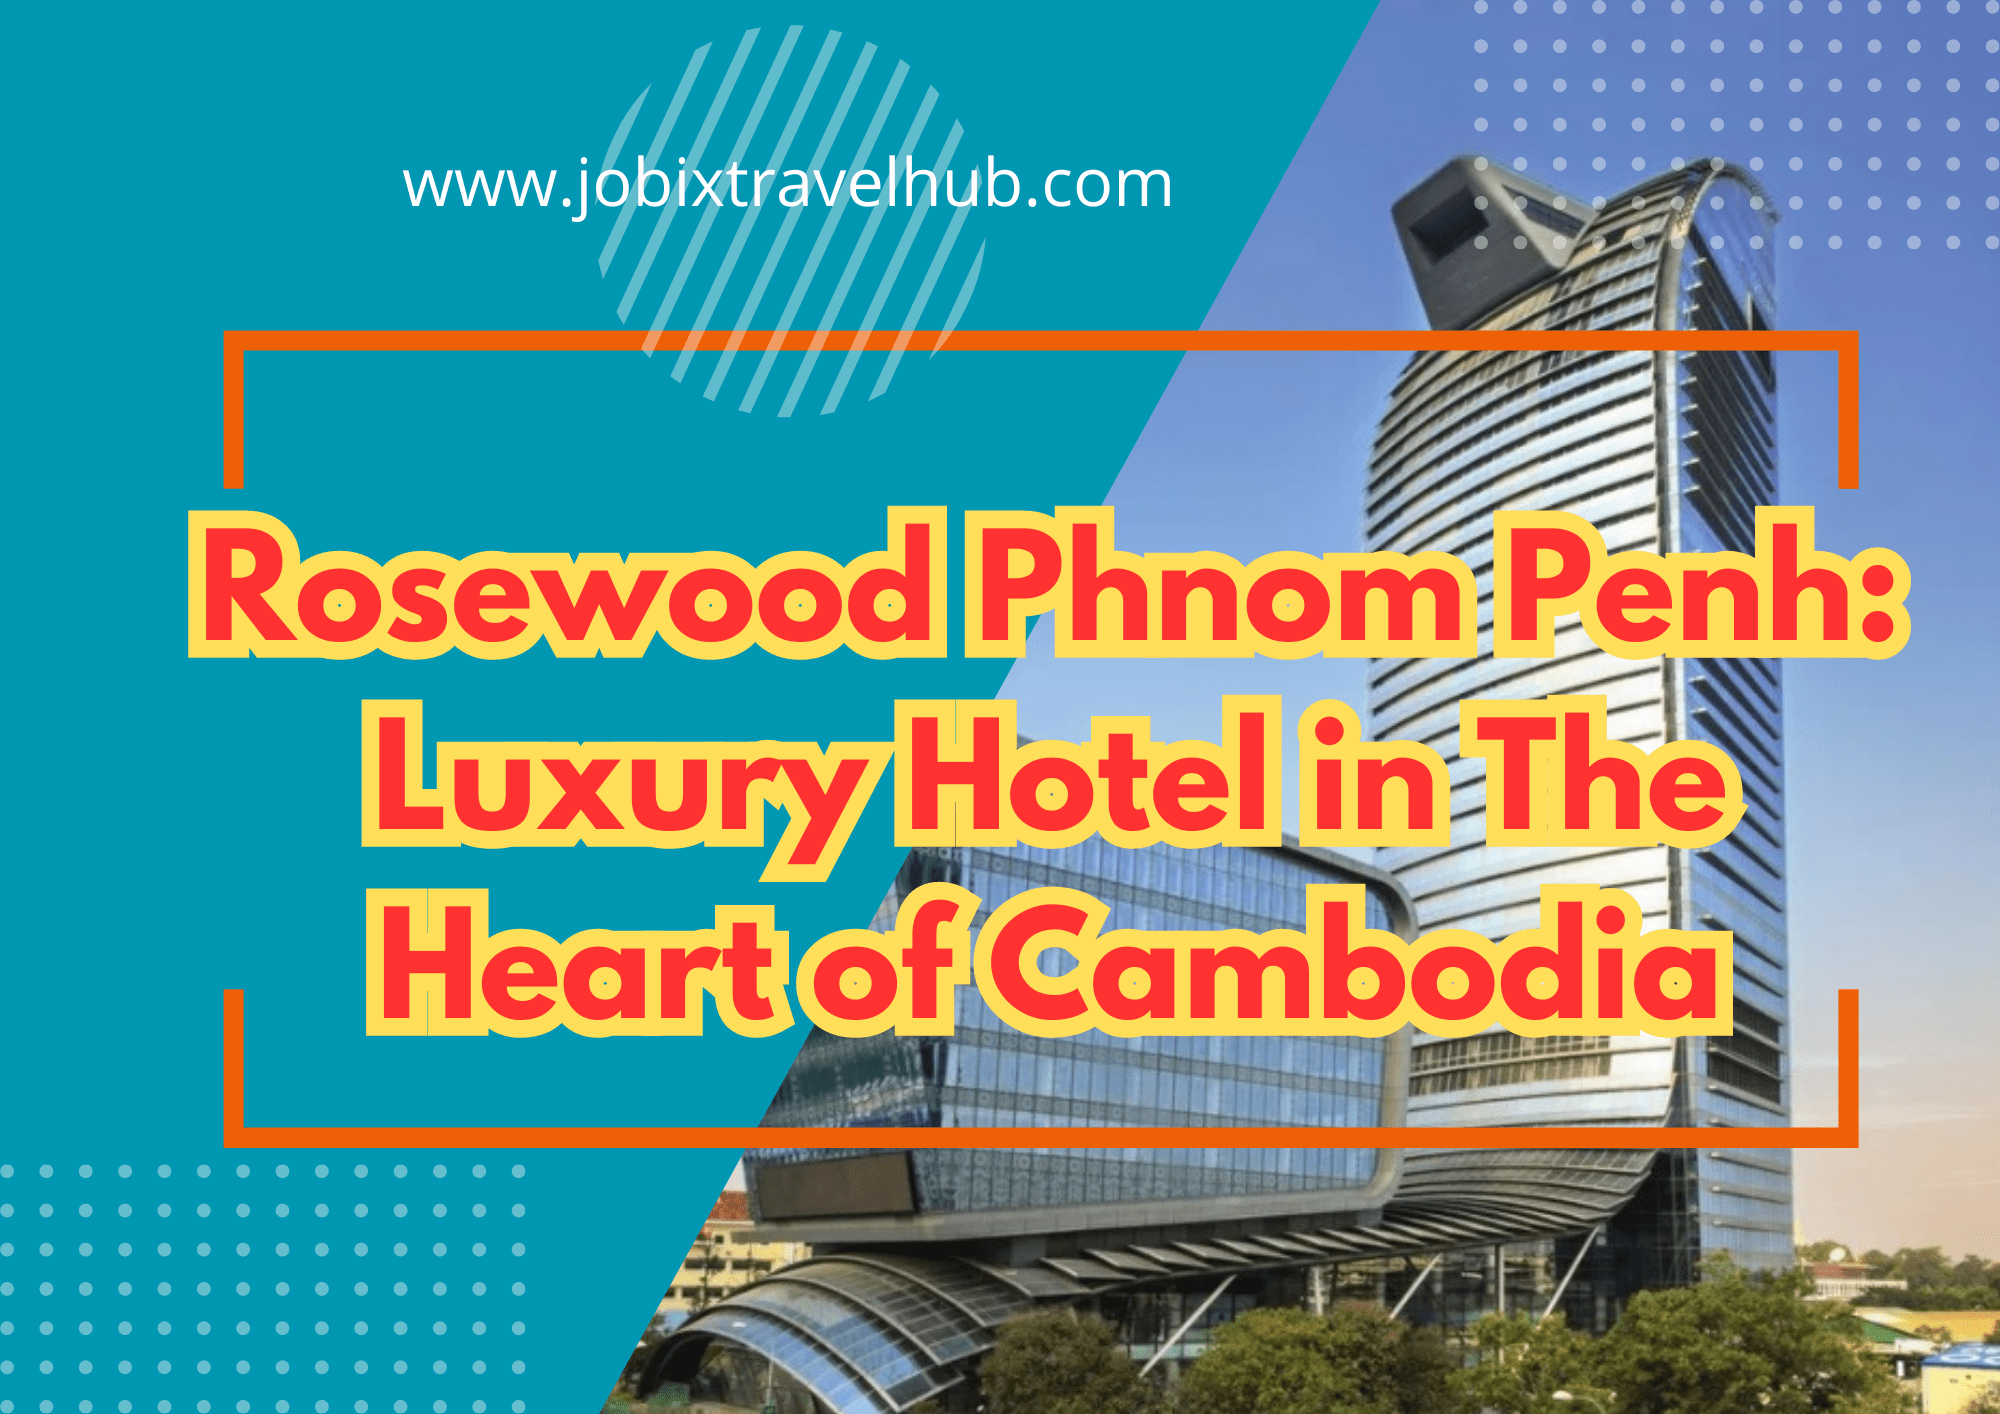 Rosewood Phnom Penh: Luxury Hotel in The Heart of Cambodia